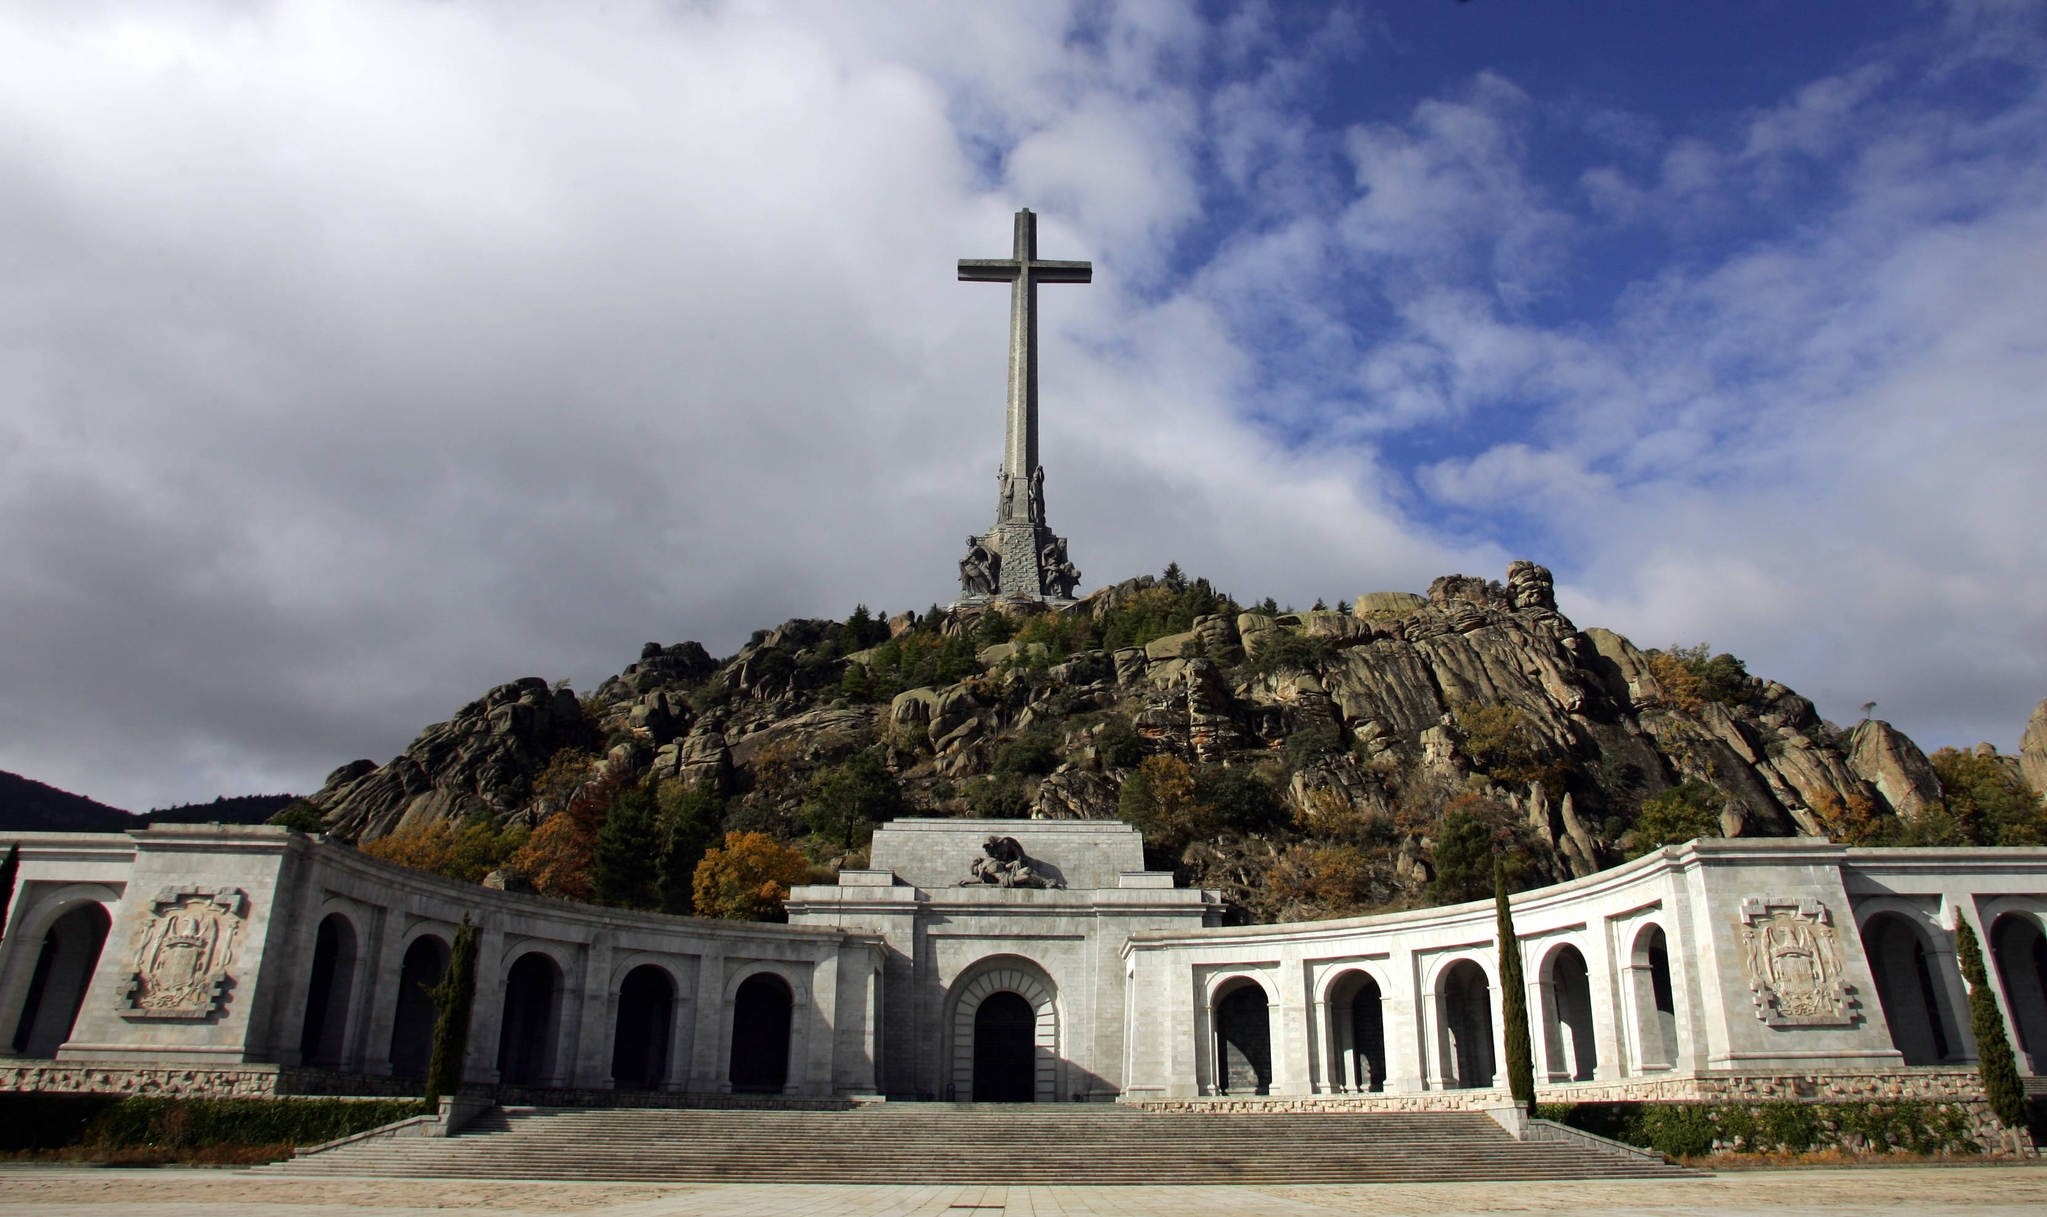 This photo taken on Nov. 13, 2005 shows a view of the Valle de los Caidos a monument to the Francoist combatants who died during the Spanish civil war and Franco's final resting place. (AFP Photo)